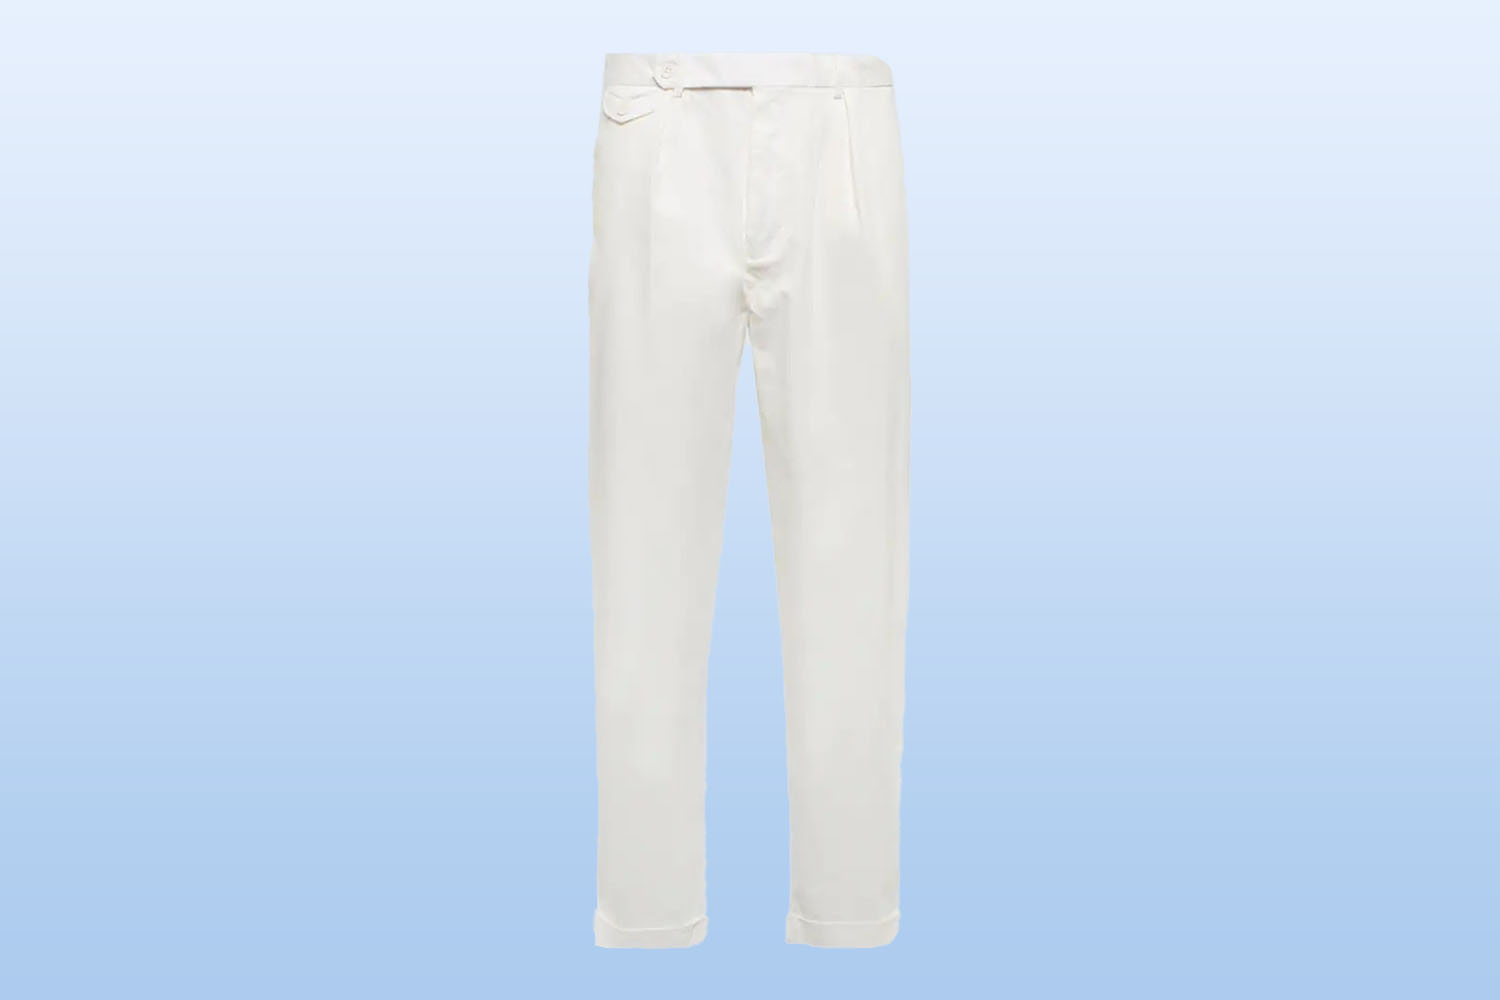 Pair of white trousers from mytheresa on a light blue background